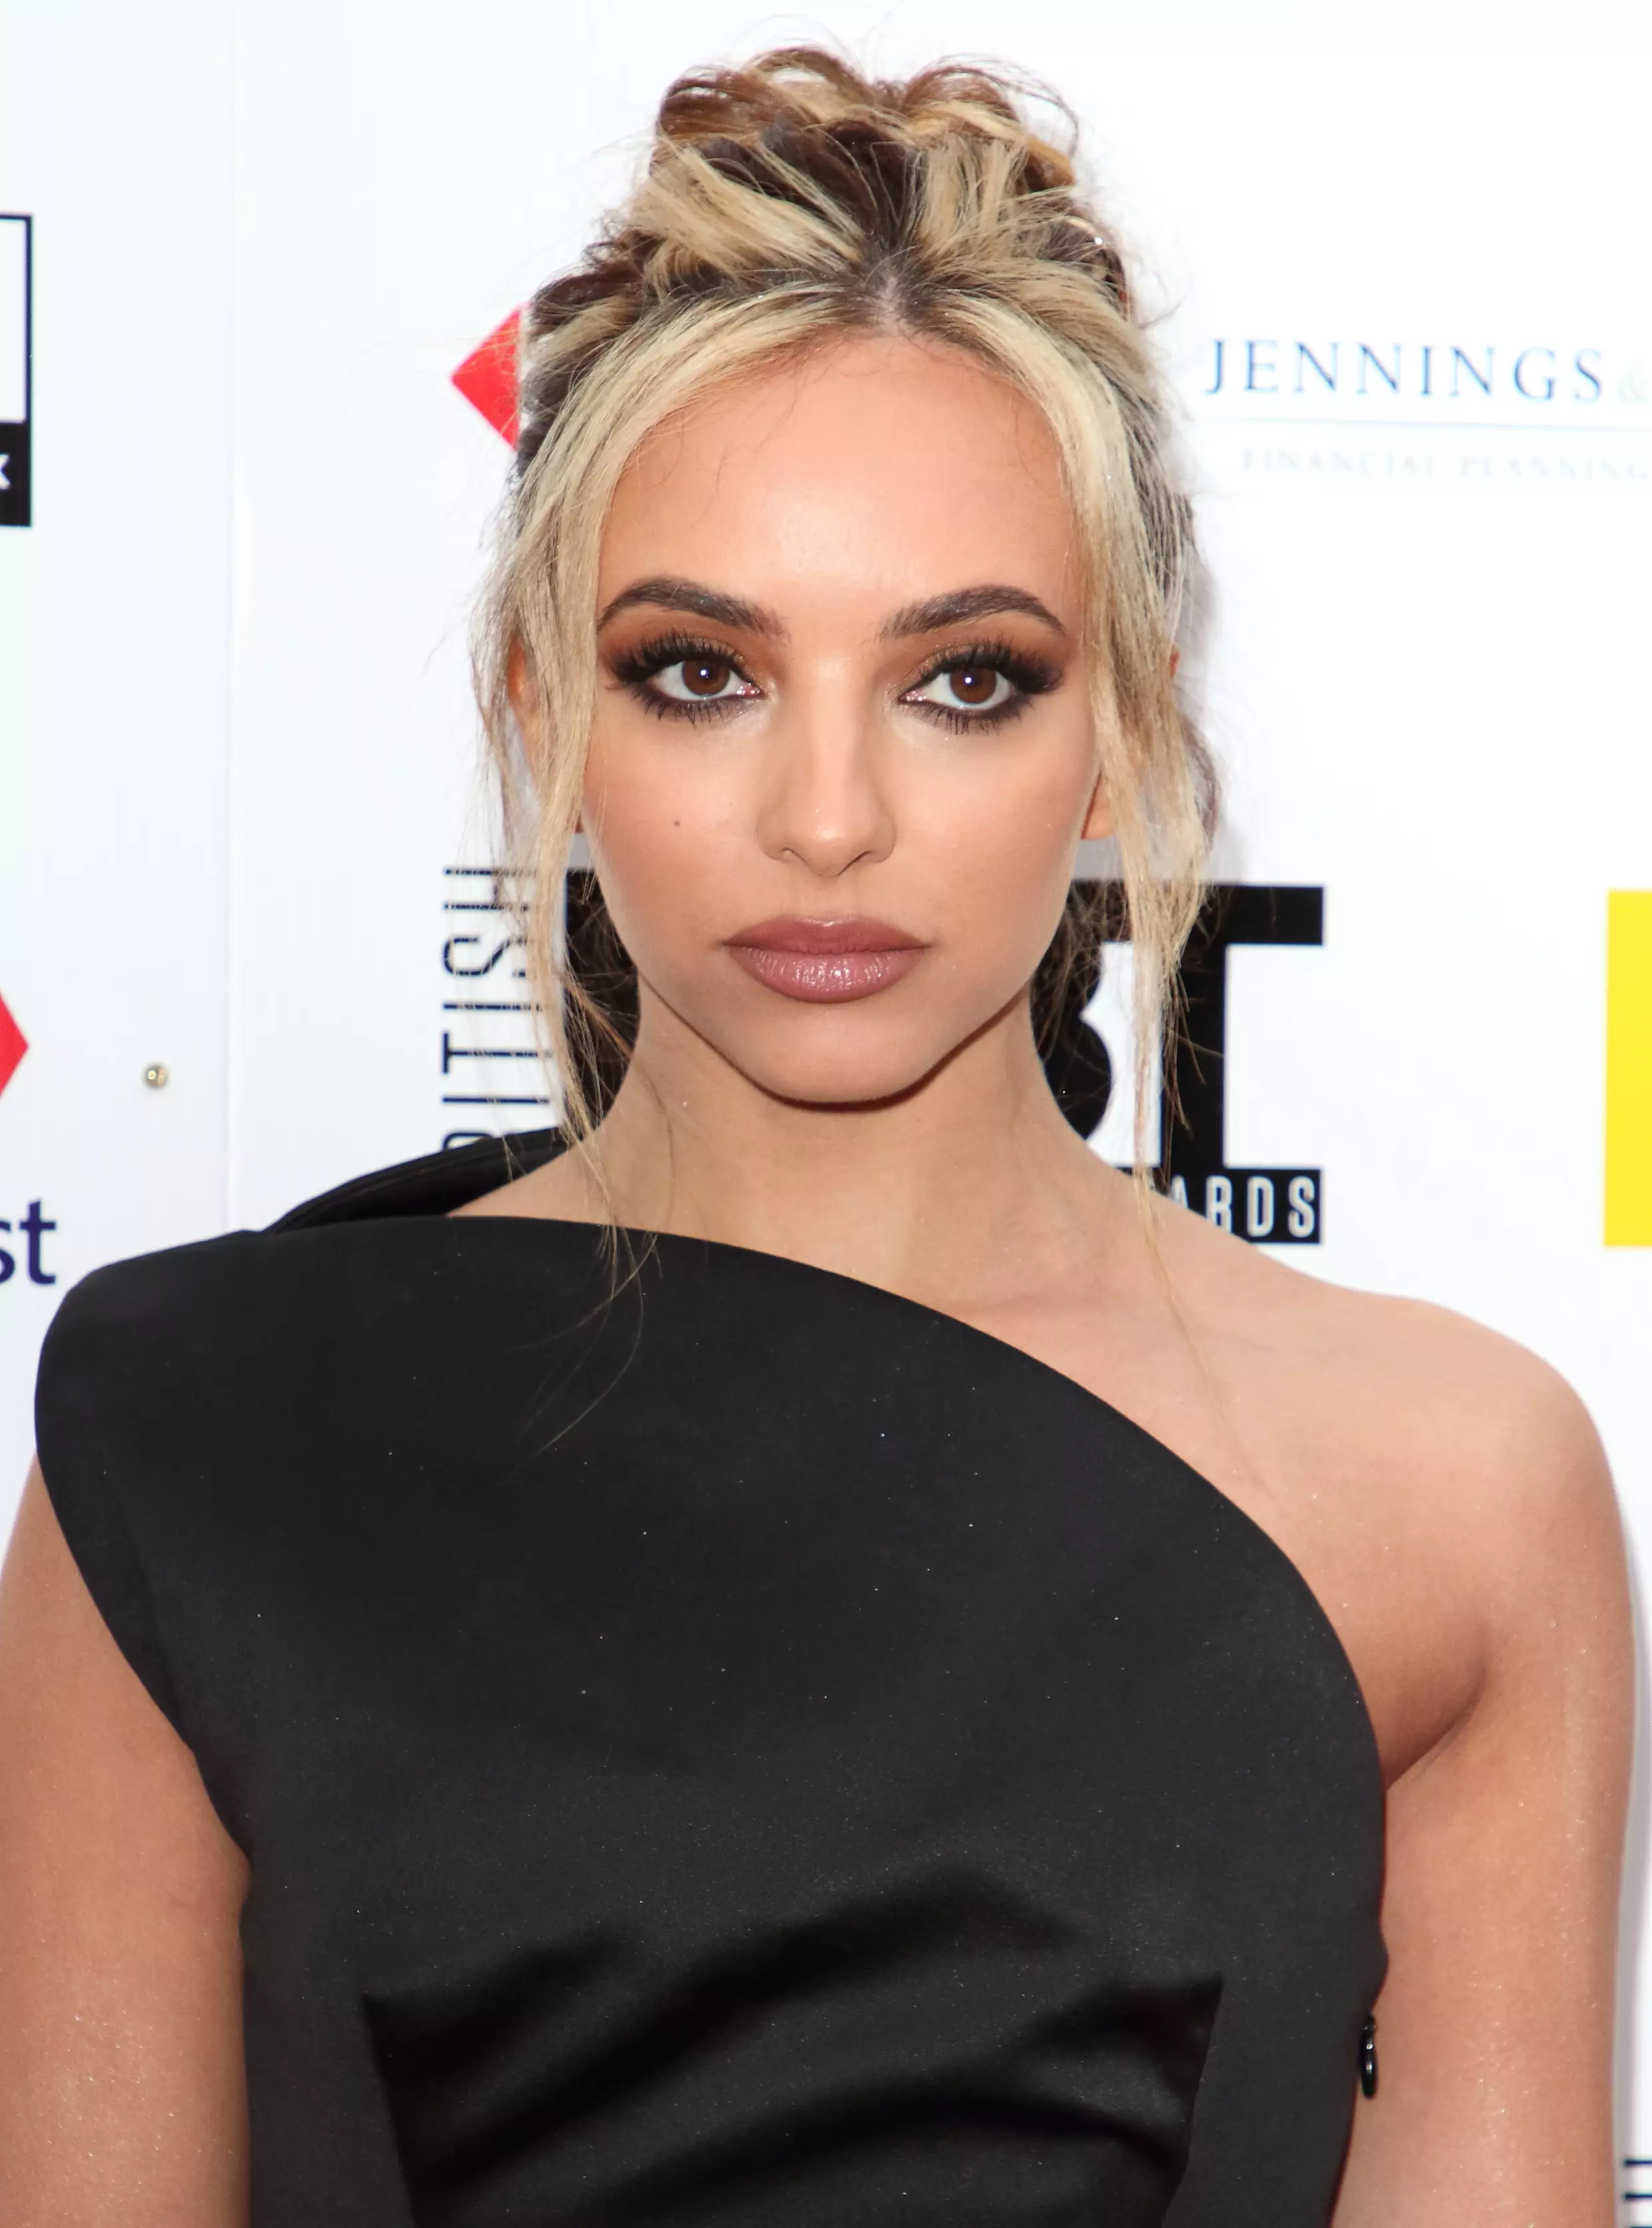 Leigh-Anne had been mistaken for bandmate Jade, pictured above (